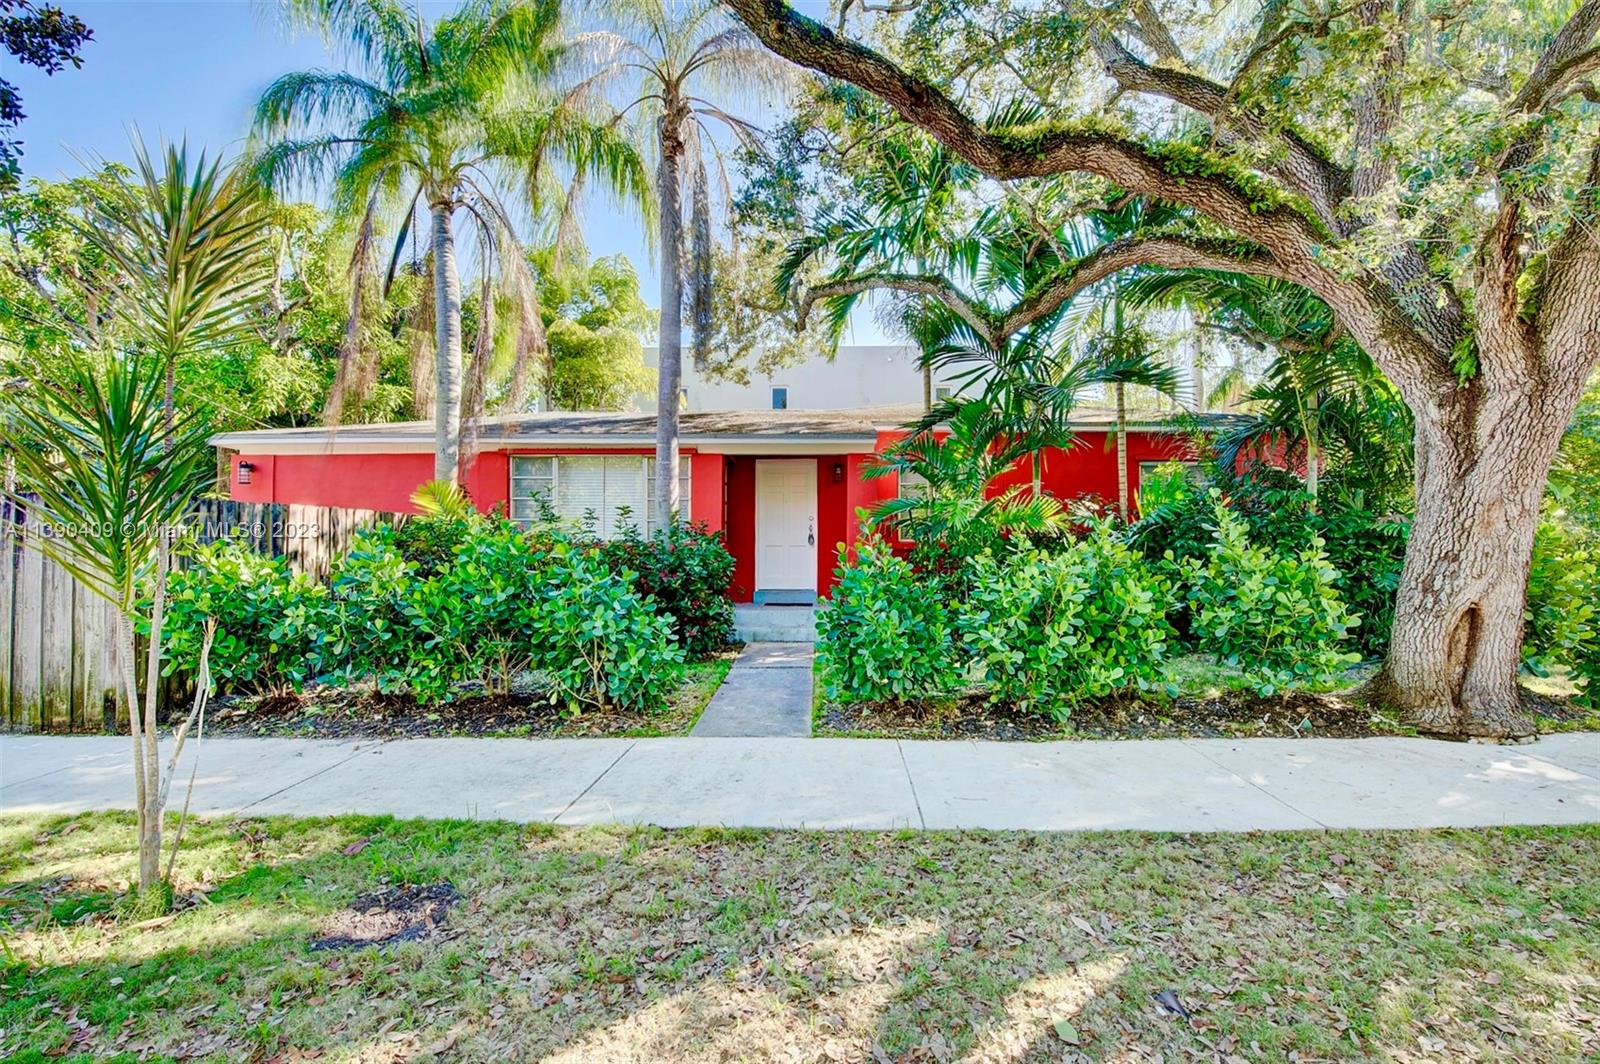 Welcome to a fabulous Artist-eclectic neighborhood! Imagine living in this updated North Coconut Grove 3 bedroom/ 2 bathroom corner home with new washer and dryer. Enjoy the functional floor plan of this darling and bright home. Nice yard completely fenced in with additional open patio and a lovely Mango Tree. Perfect for outdoor gatherings. Conveniently located near Kennedy Park, Fresh Market, Montys, StarBucks, Grove Harbor, the Famous North Grove Kapok tree, Ransom School, Coral Reef Yacht Club, Sailing Club,Regatta Harbour, Anatomy Luxury Gym, Fine restaurants, Art Boutiques and the NEW Cocowalk! Very friendly-fun neighborhood! Available now for rent as well. Under AC Over 1,200 SQ FT